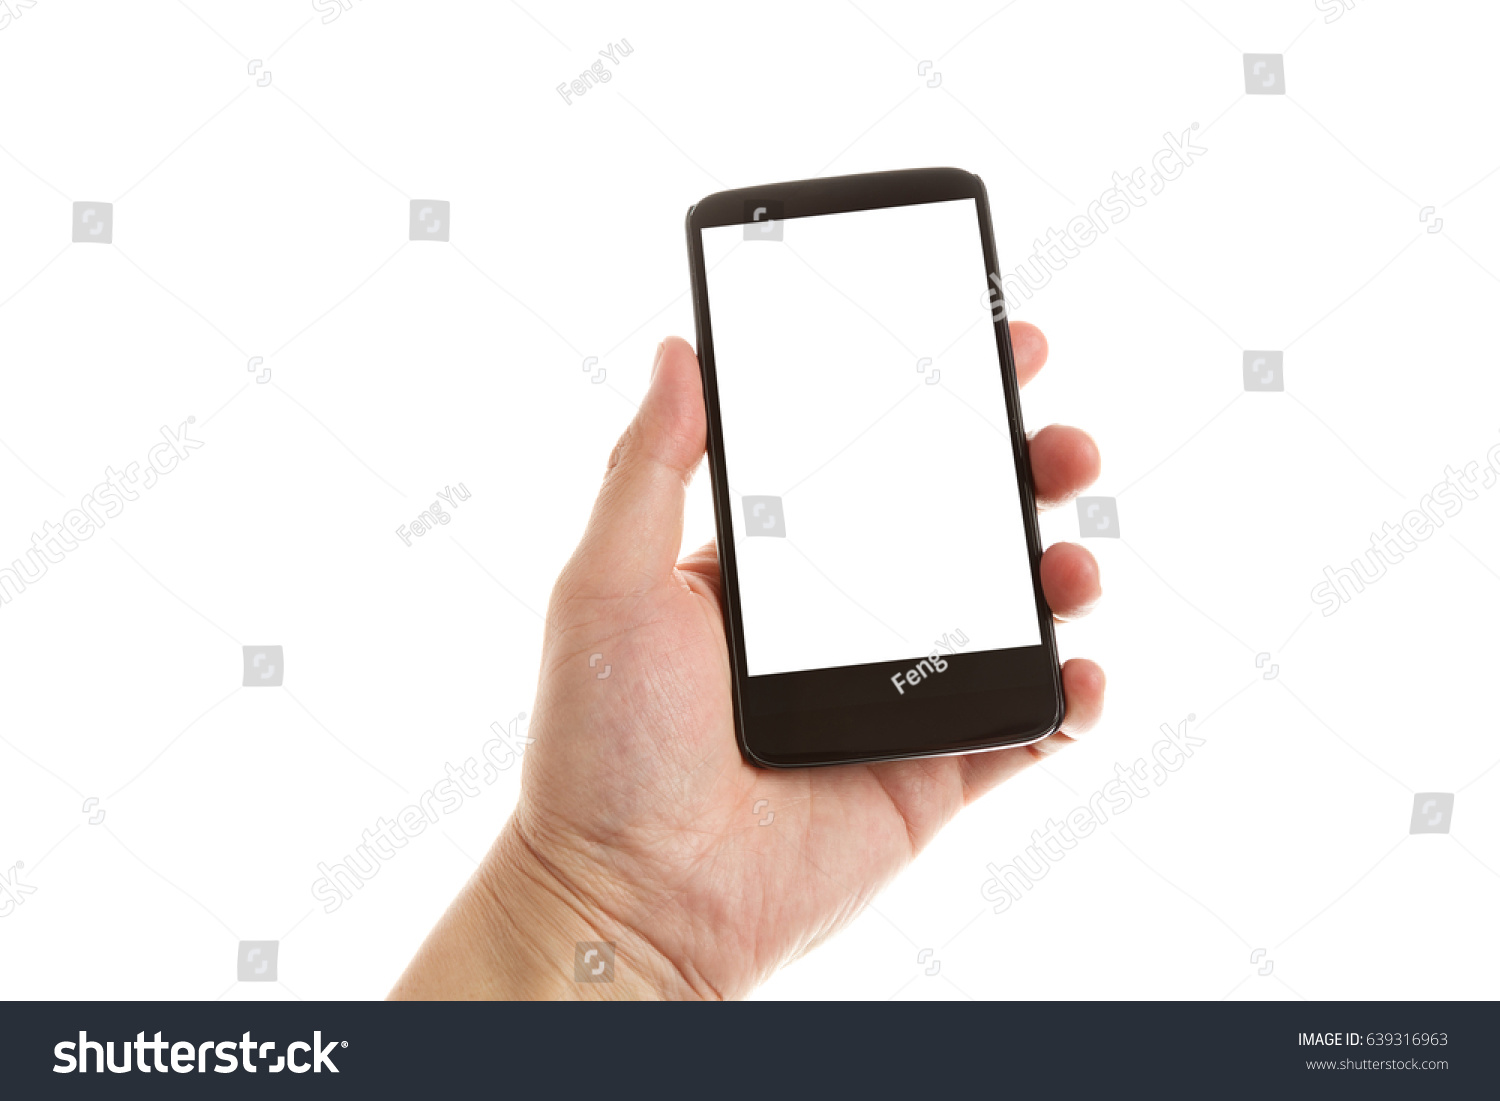 hand holding and showing smartphone with blank screen. Isolated on white background  #639316963